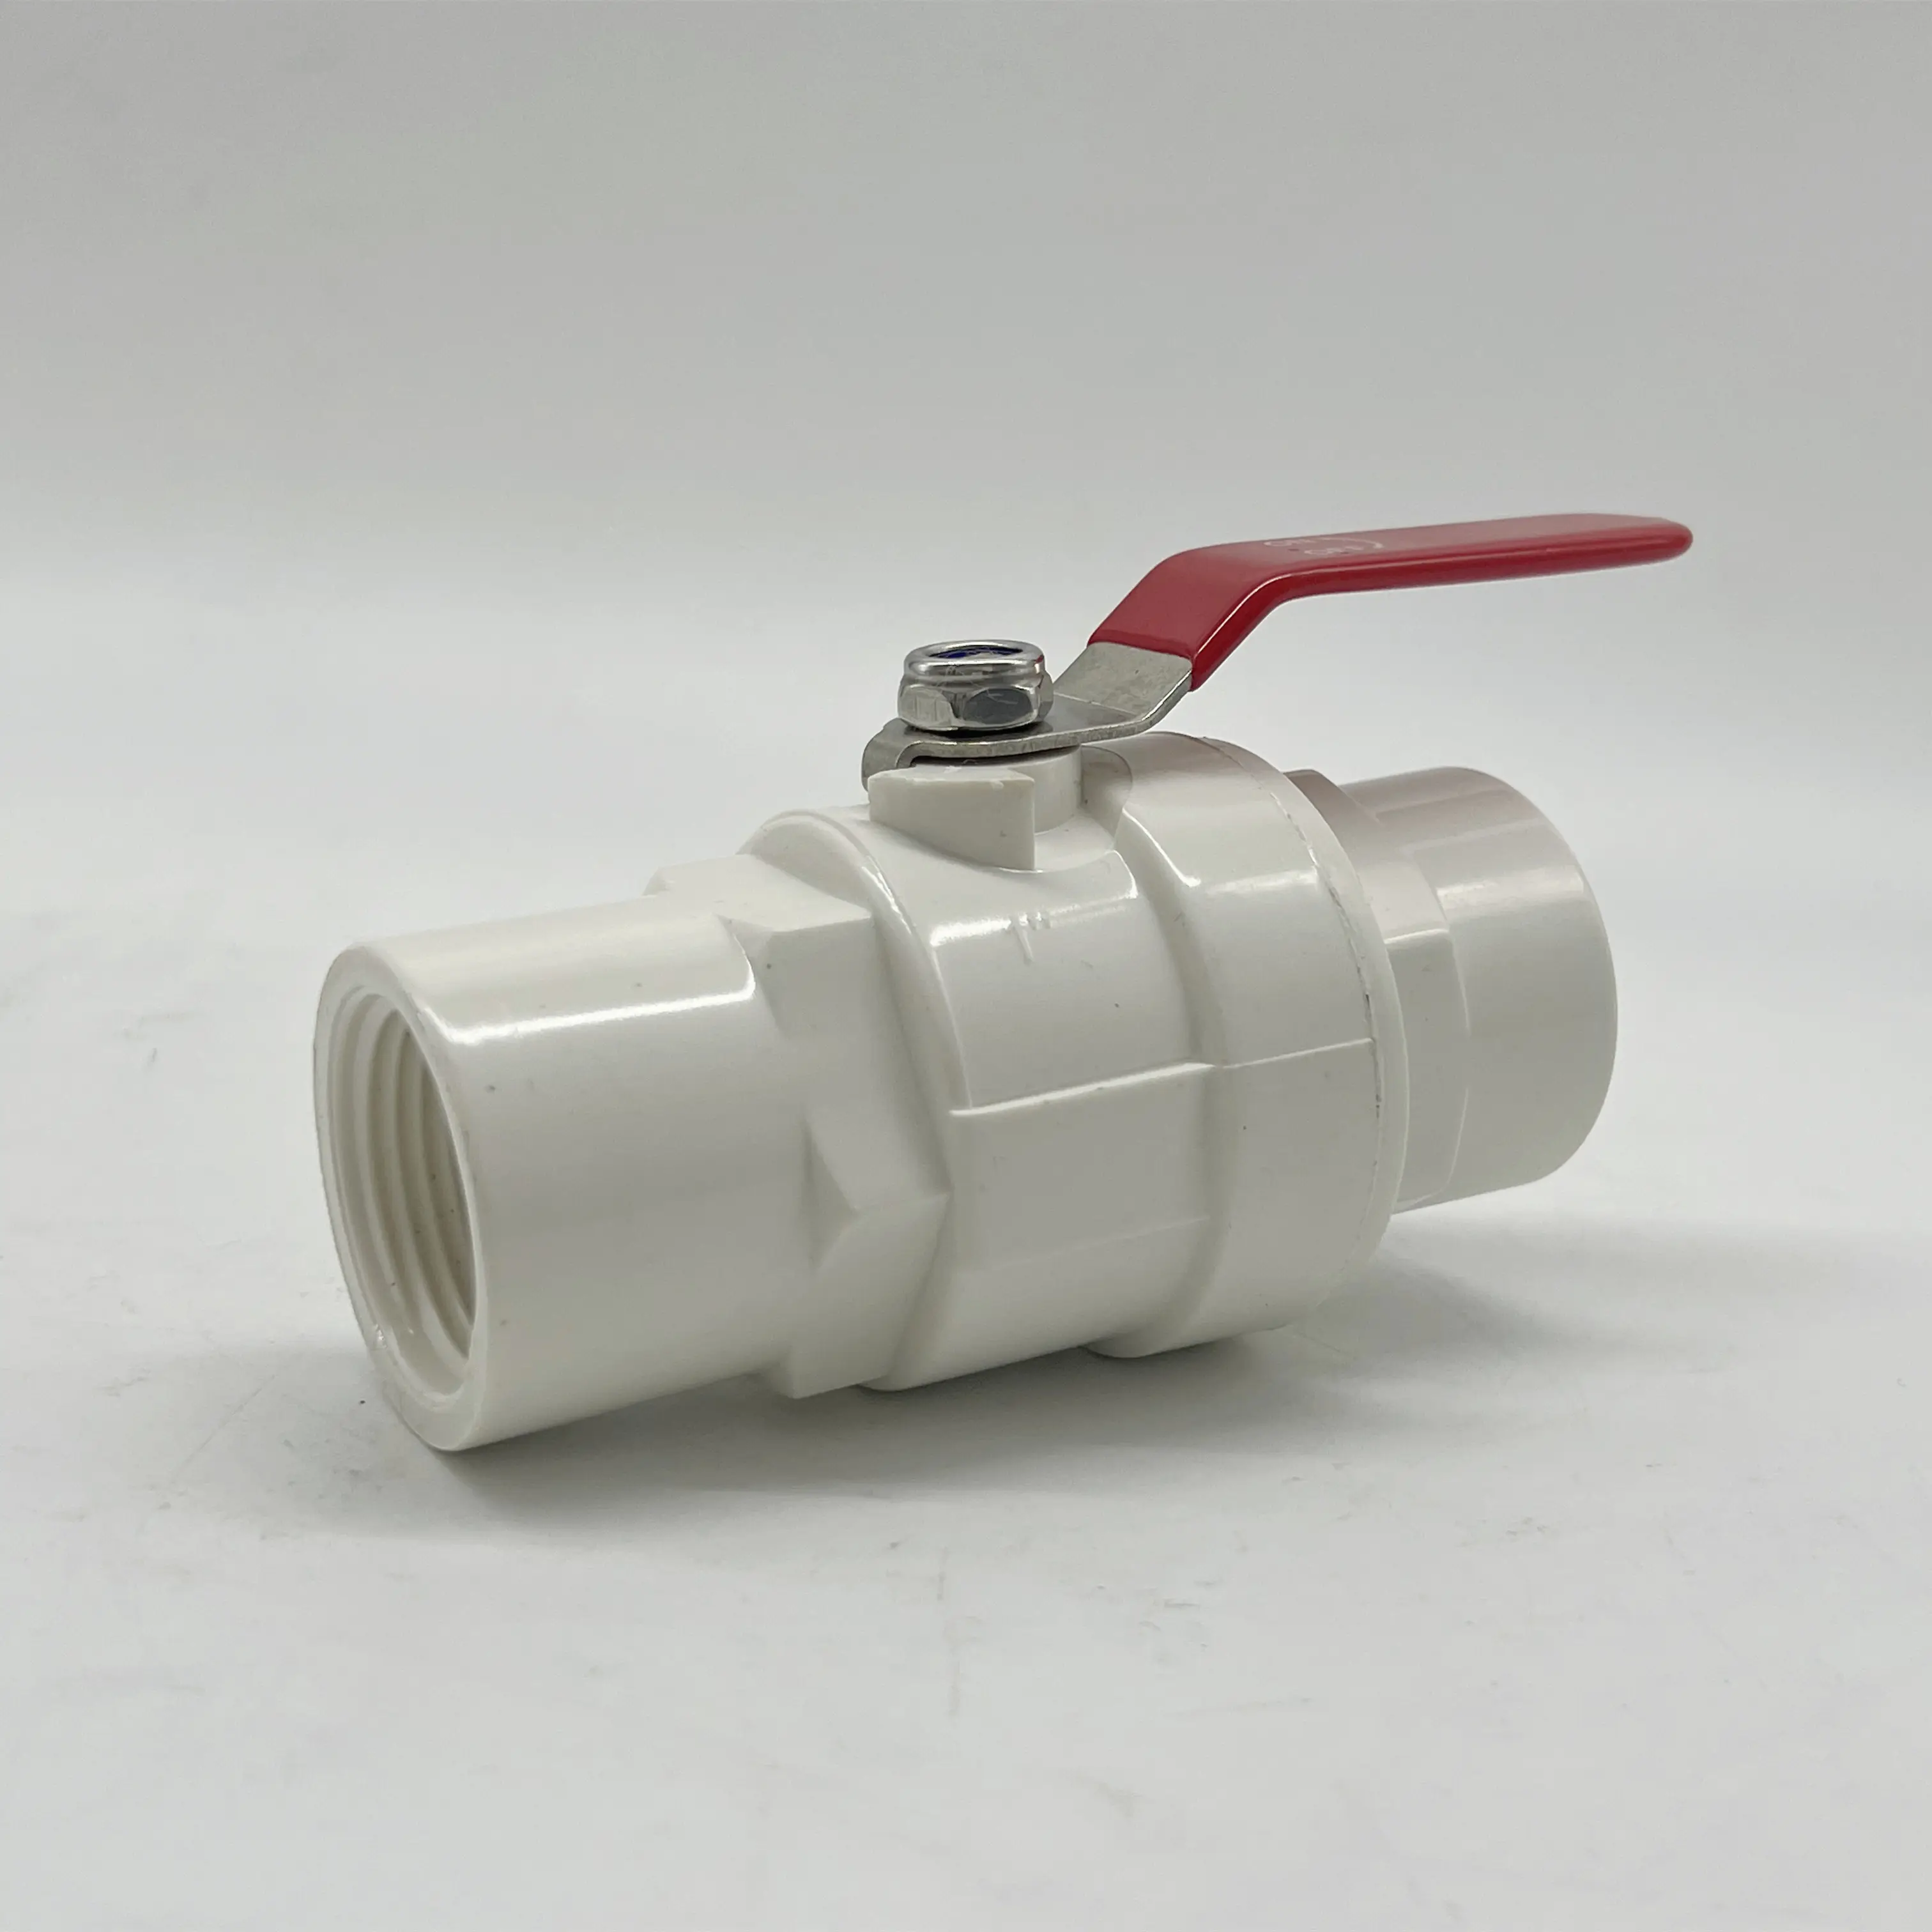 China factory supply pvc two pieces ball valve stainless steel handle